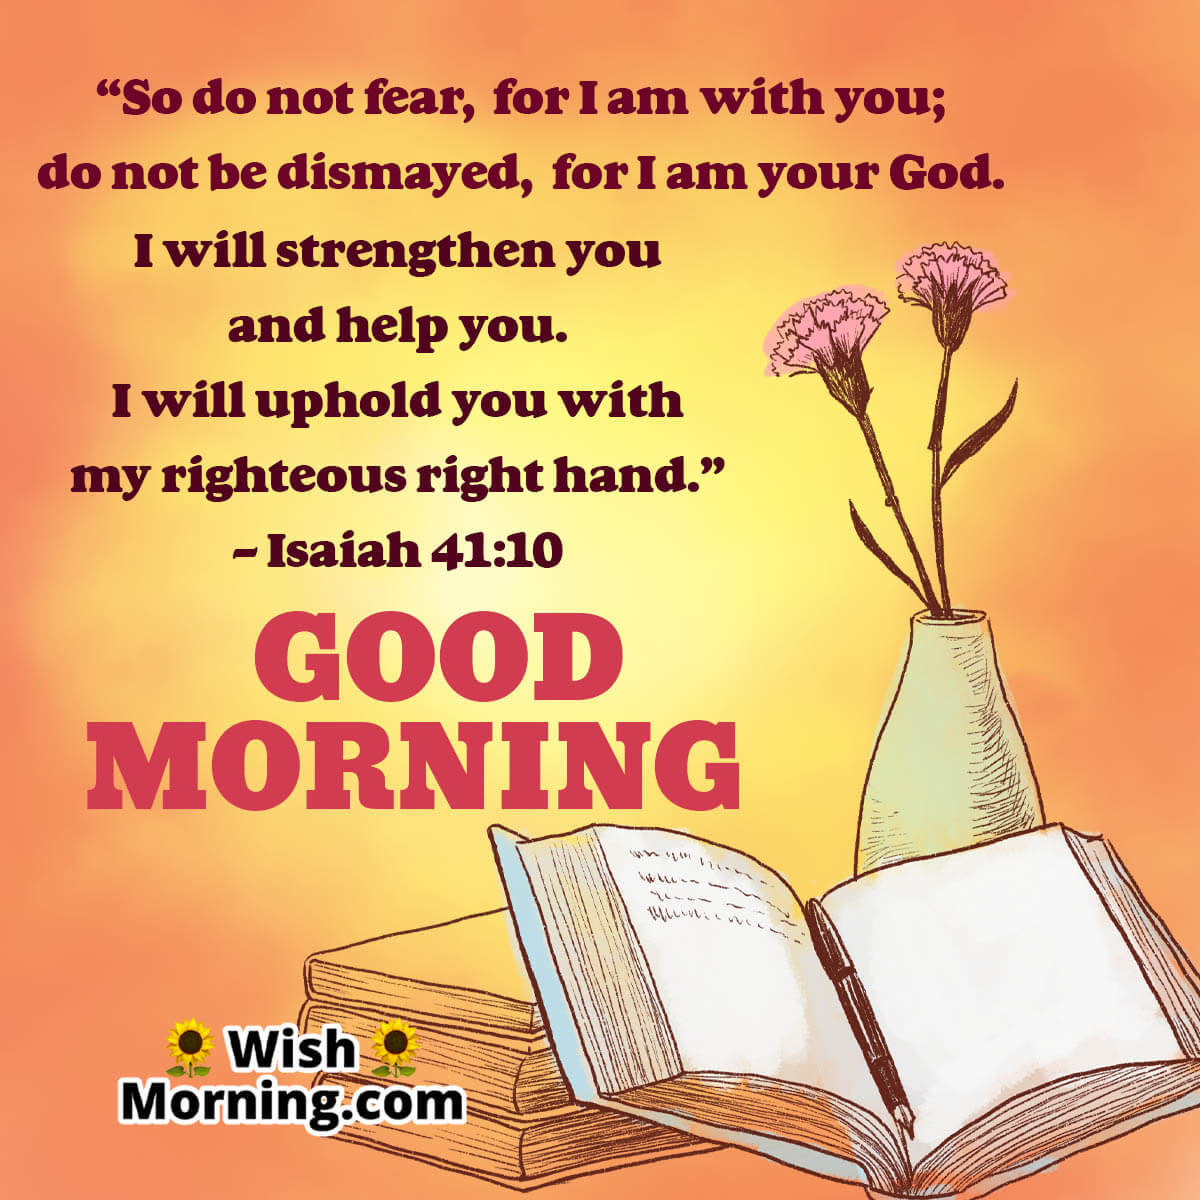 Good Morning Quotes from the Bible - Wish Morning